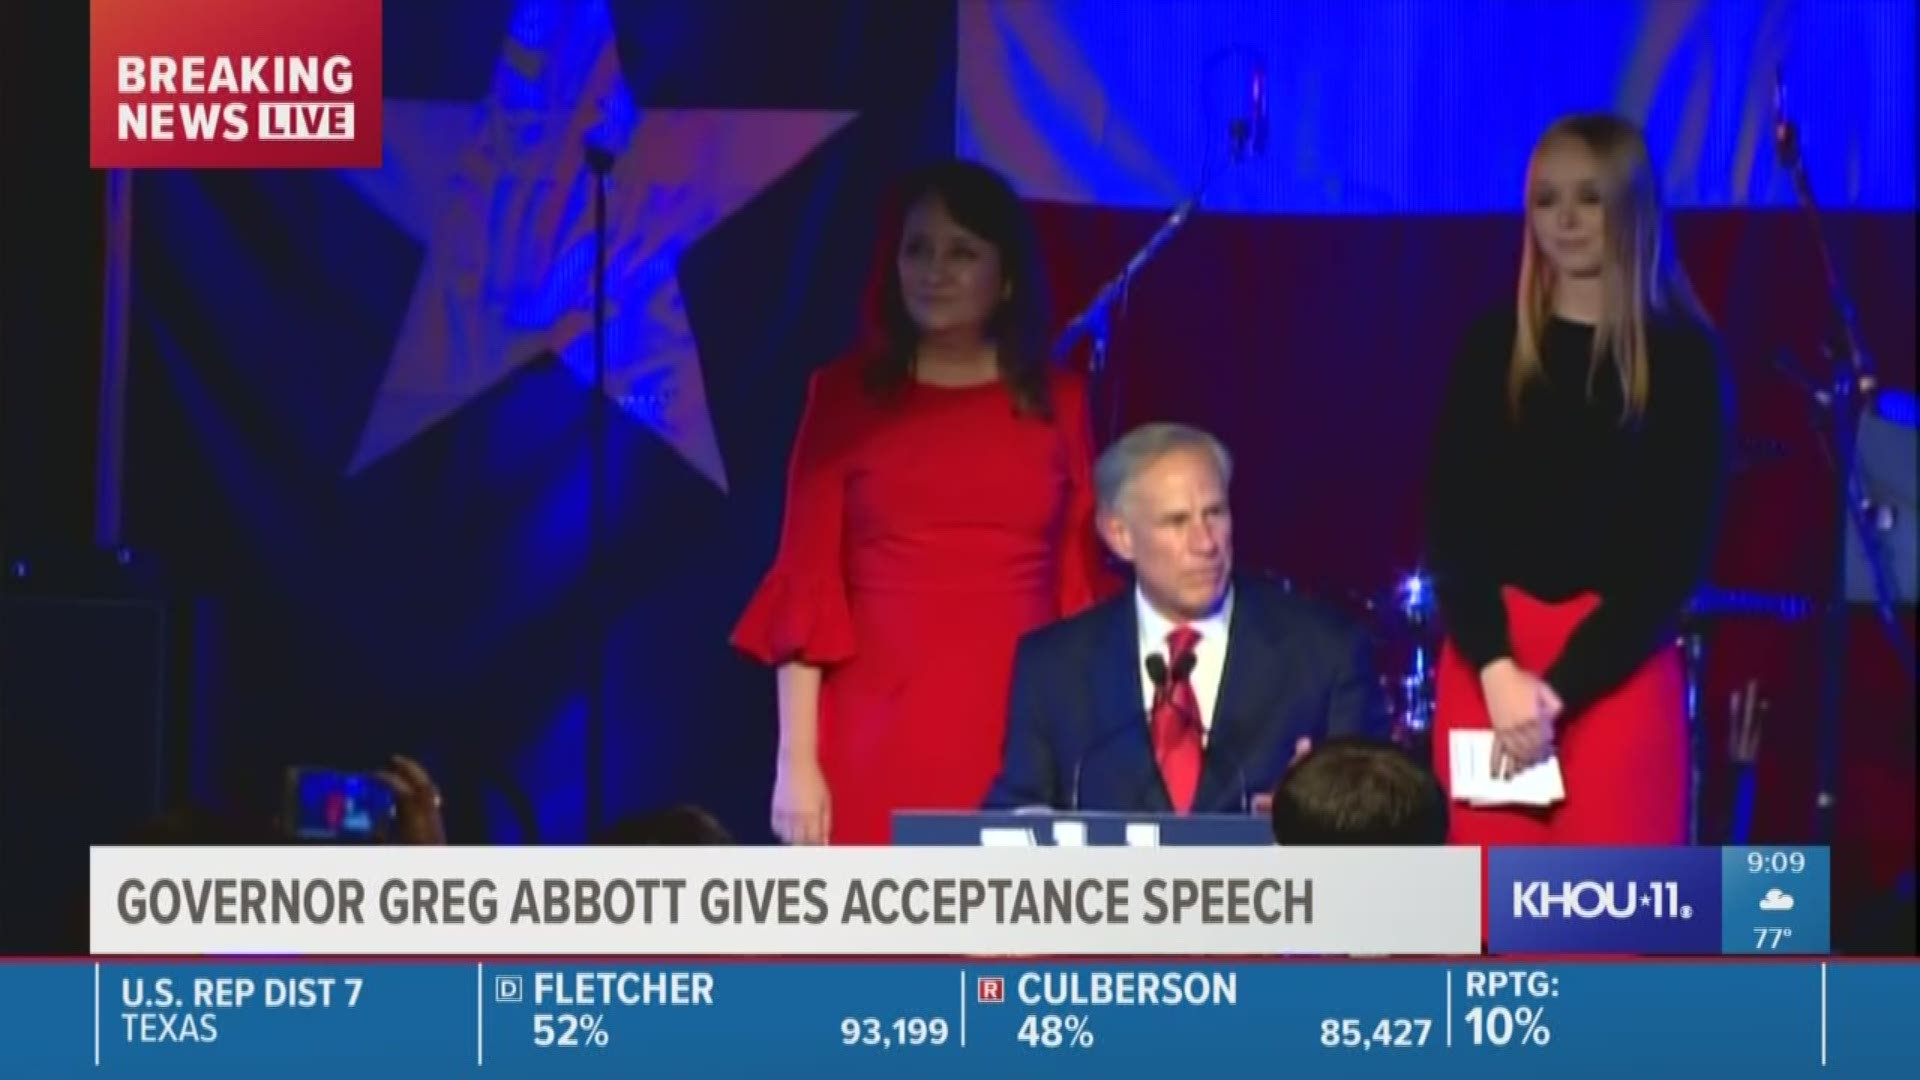 Greg Abbott gives an acceptance speech after he learned he was re-elected Governor of Texas.